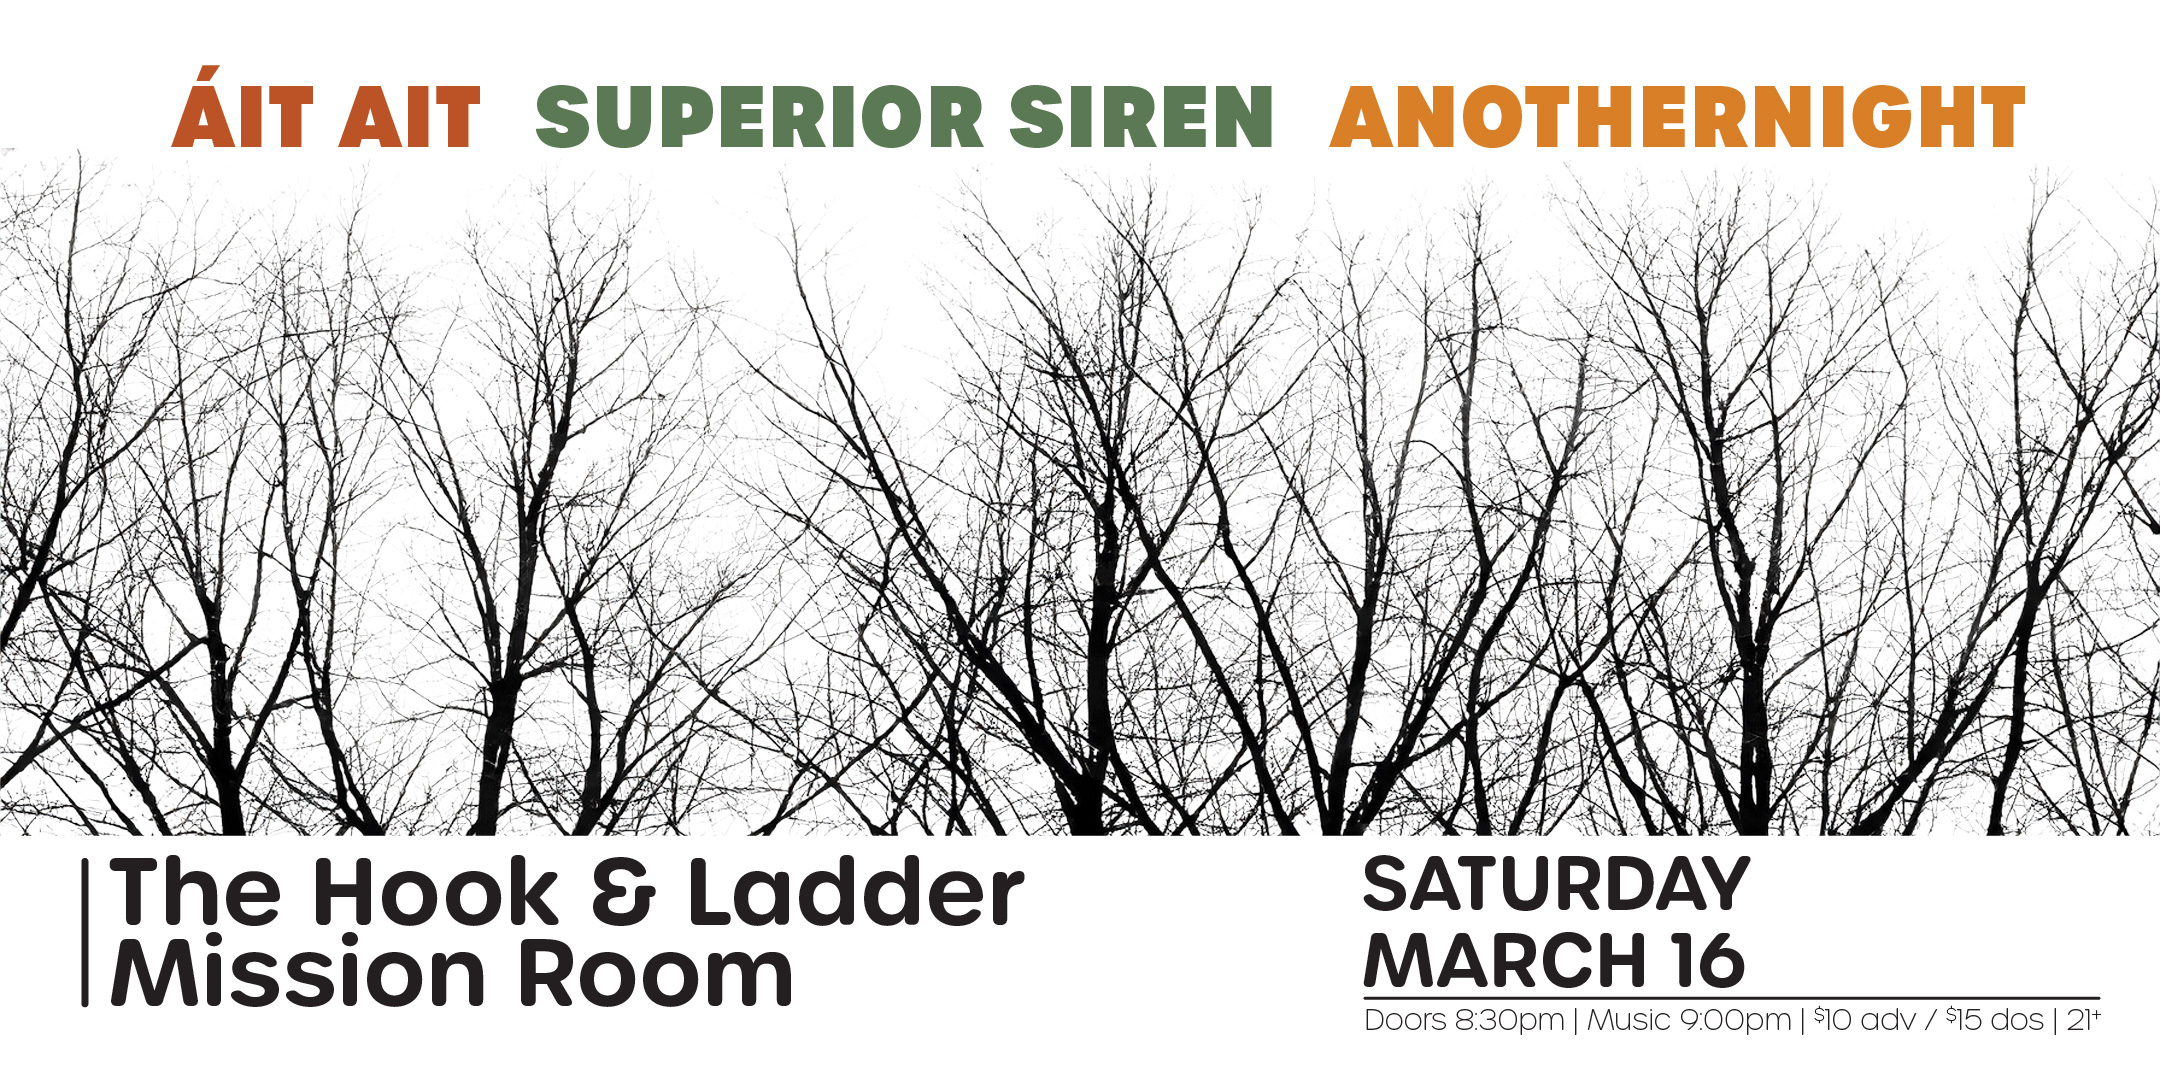 Áit Ait Superior Siren Anothernight Saturday, March 16 The Hook and Ladder Mission Room Doors 8:30pm :: Music 9:00pm :: 21+ General Admission: $10 ADV / $15 DOS